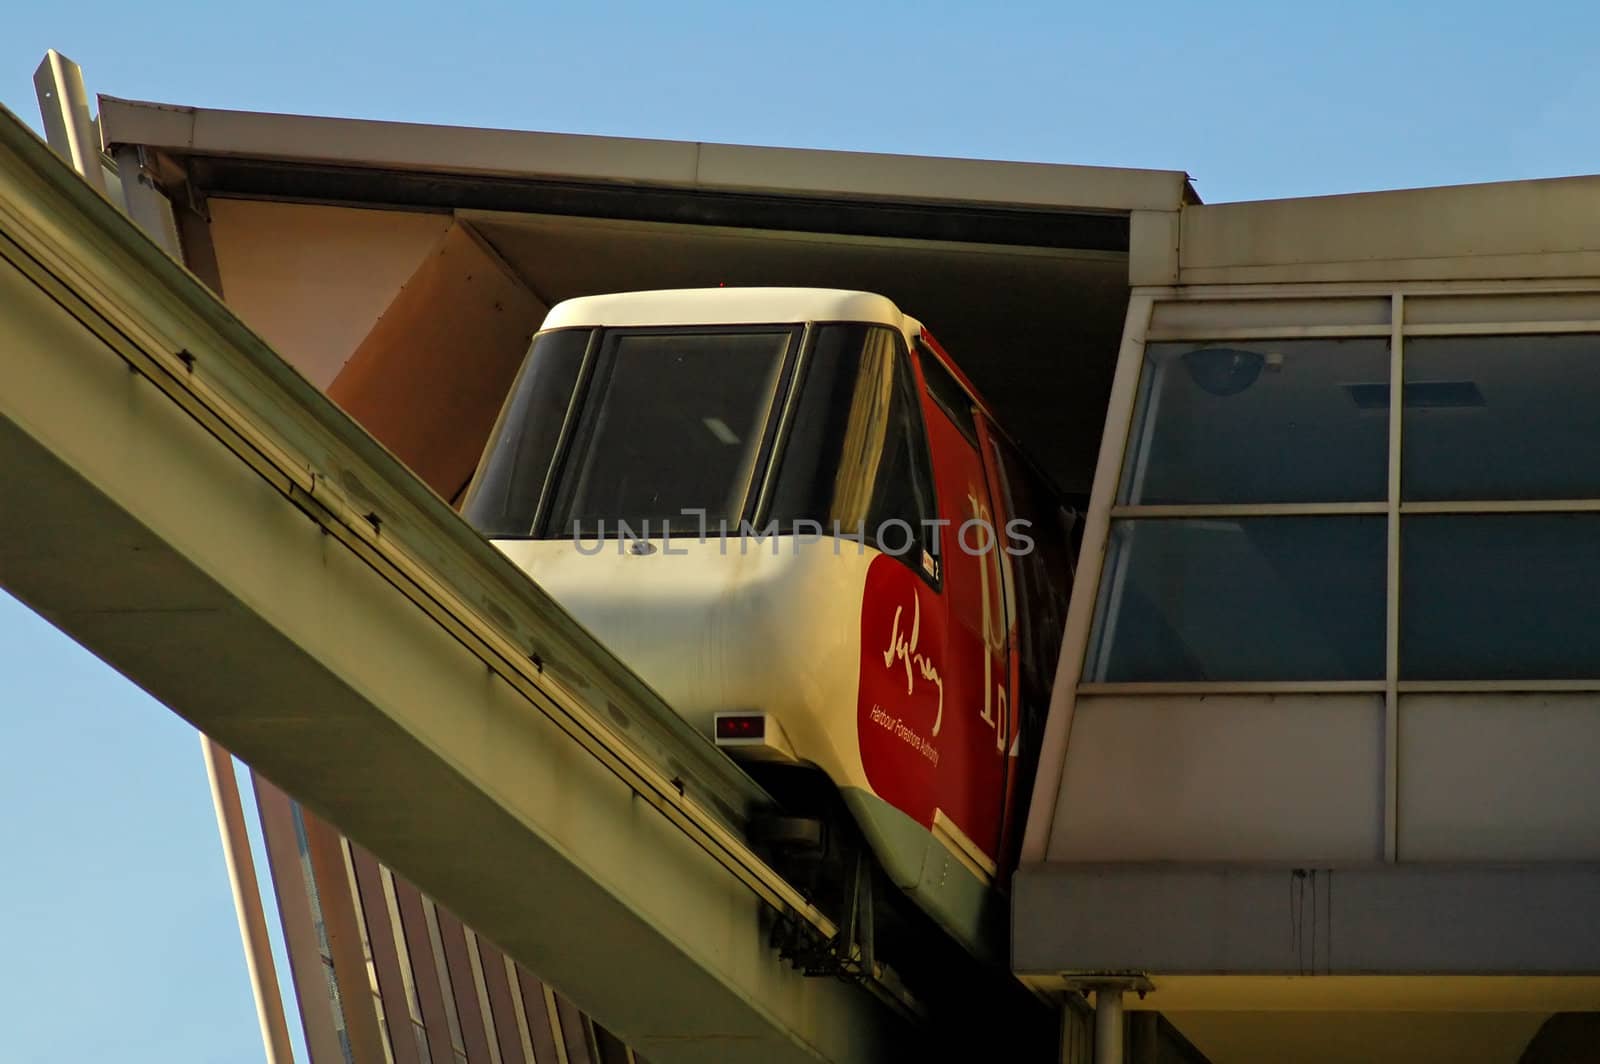 sydney monorail, red/white train leaving station above ground